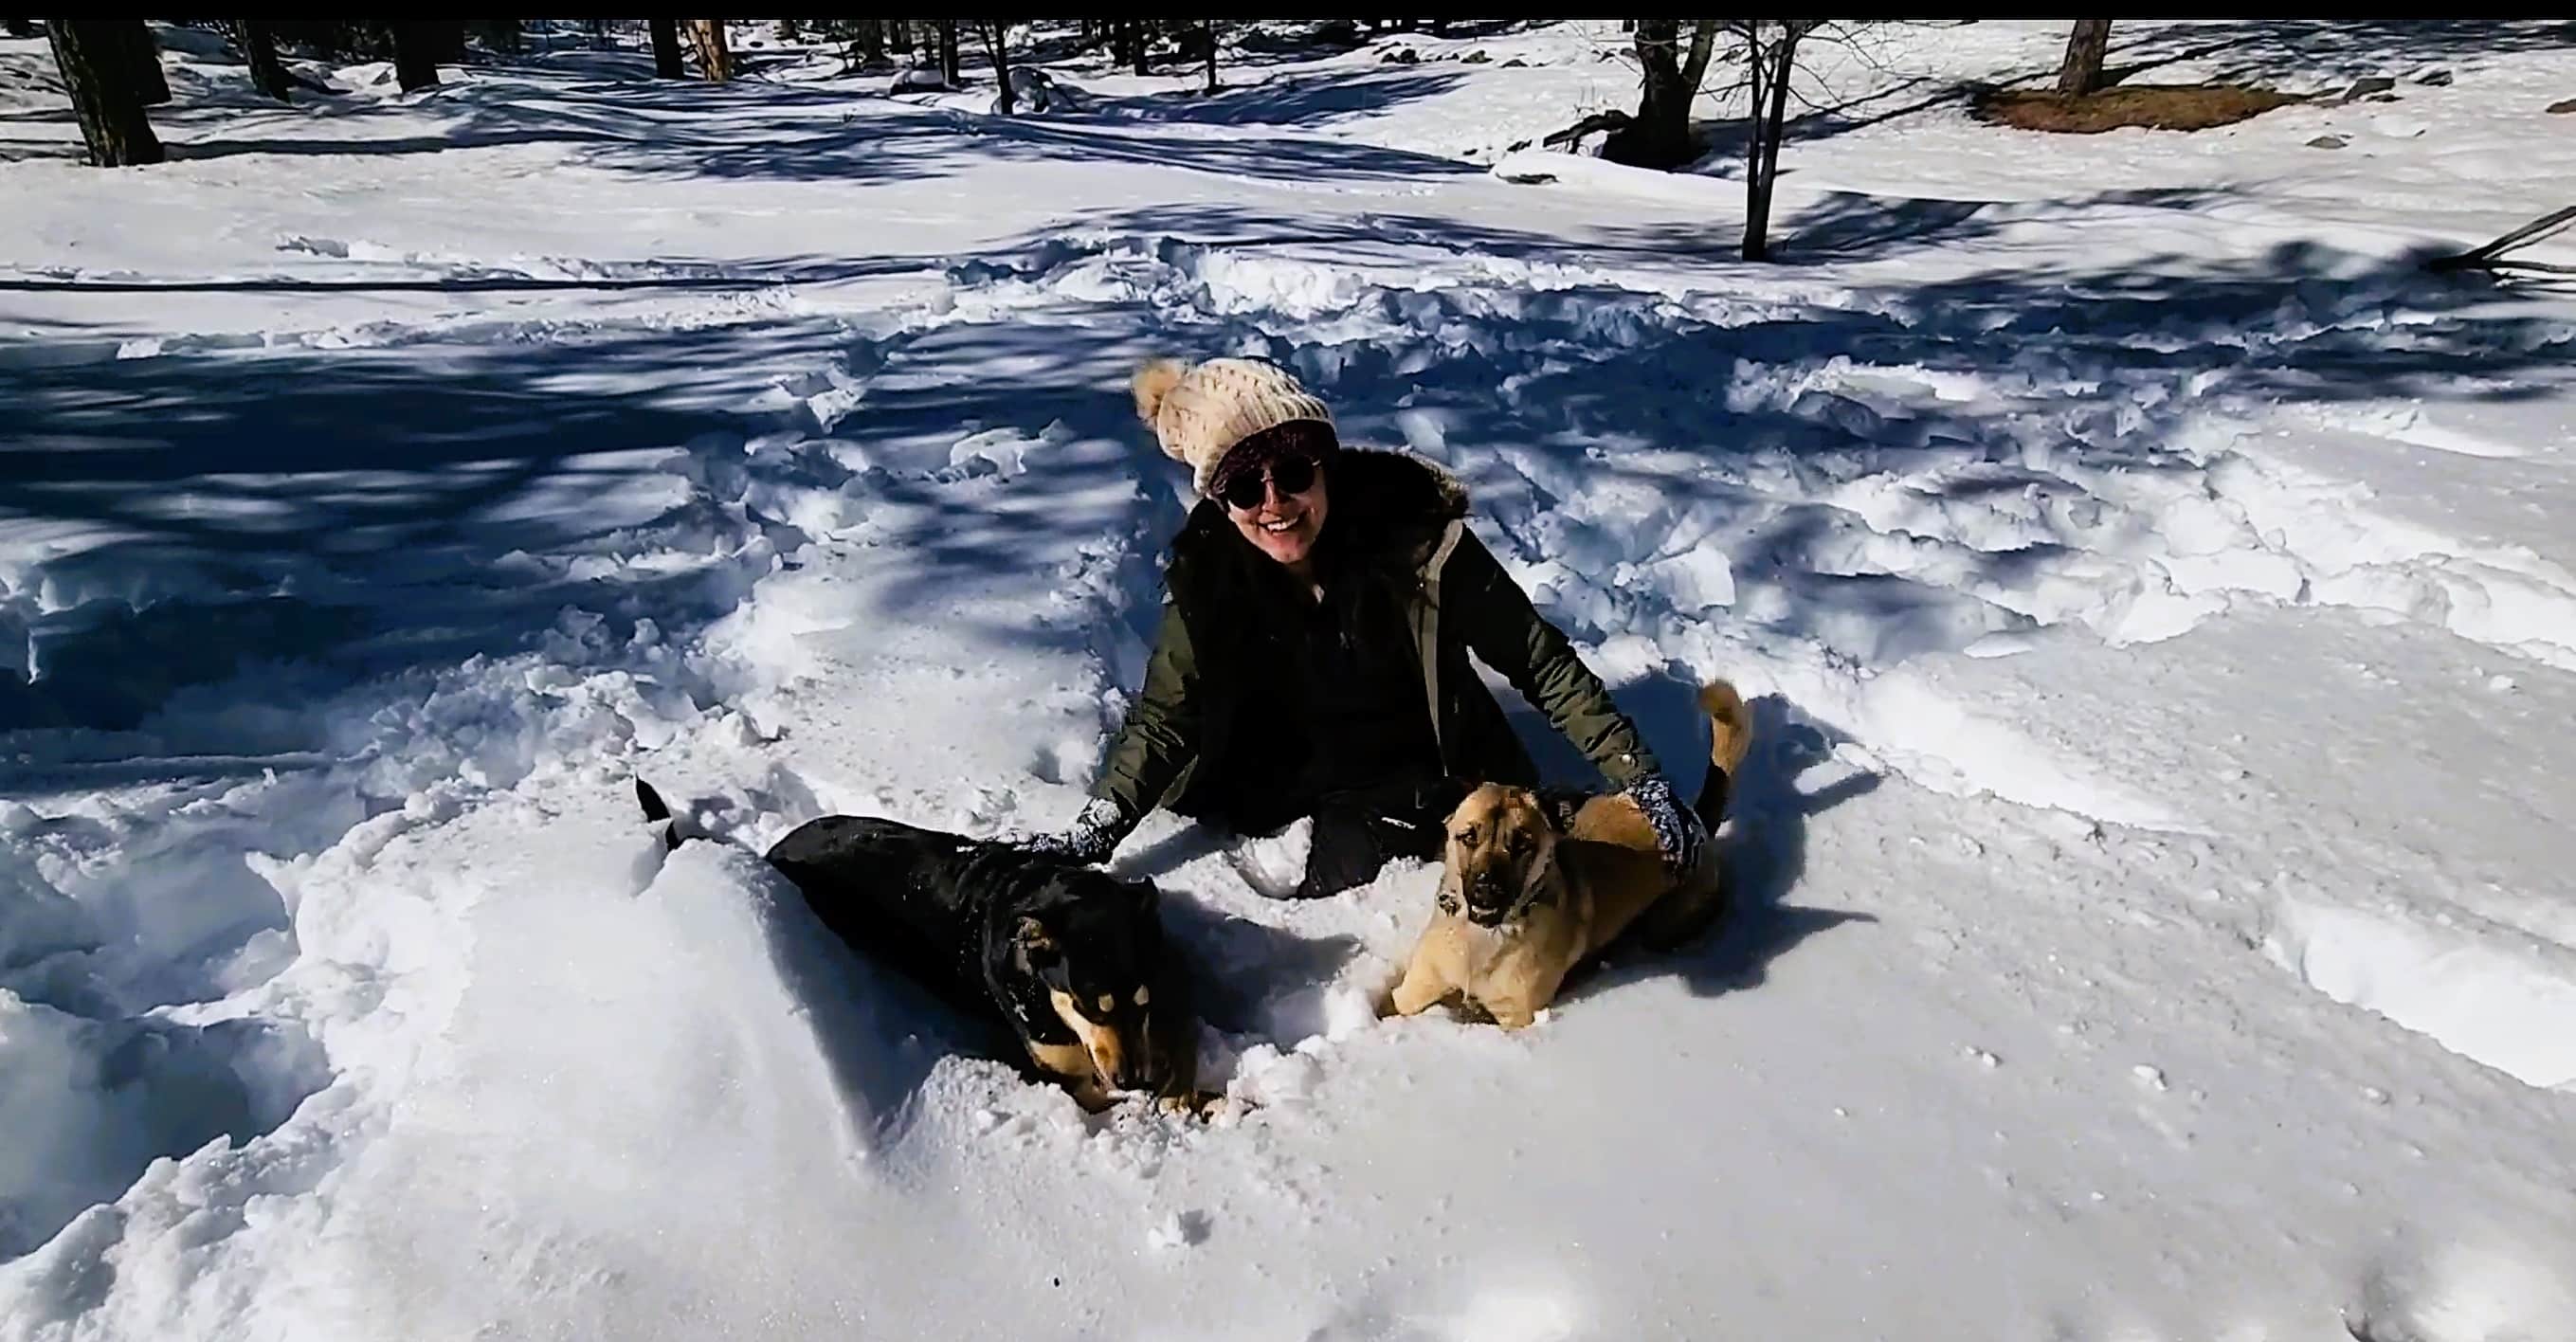 Two pups, Sadie and Anny playing in the Snow with woman behind them. Snowy forest all around